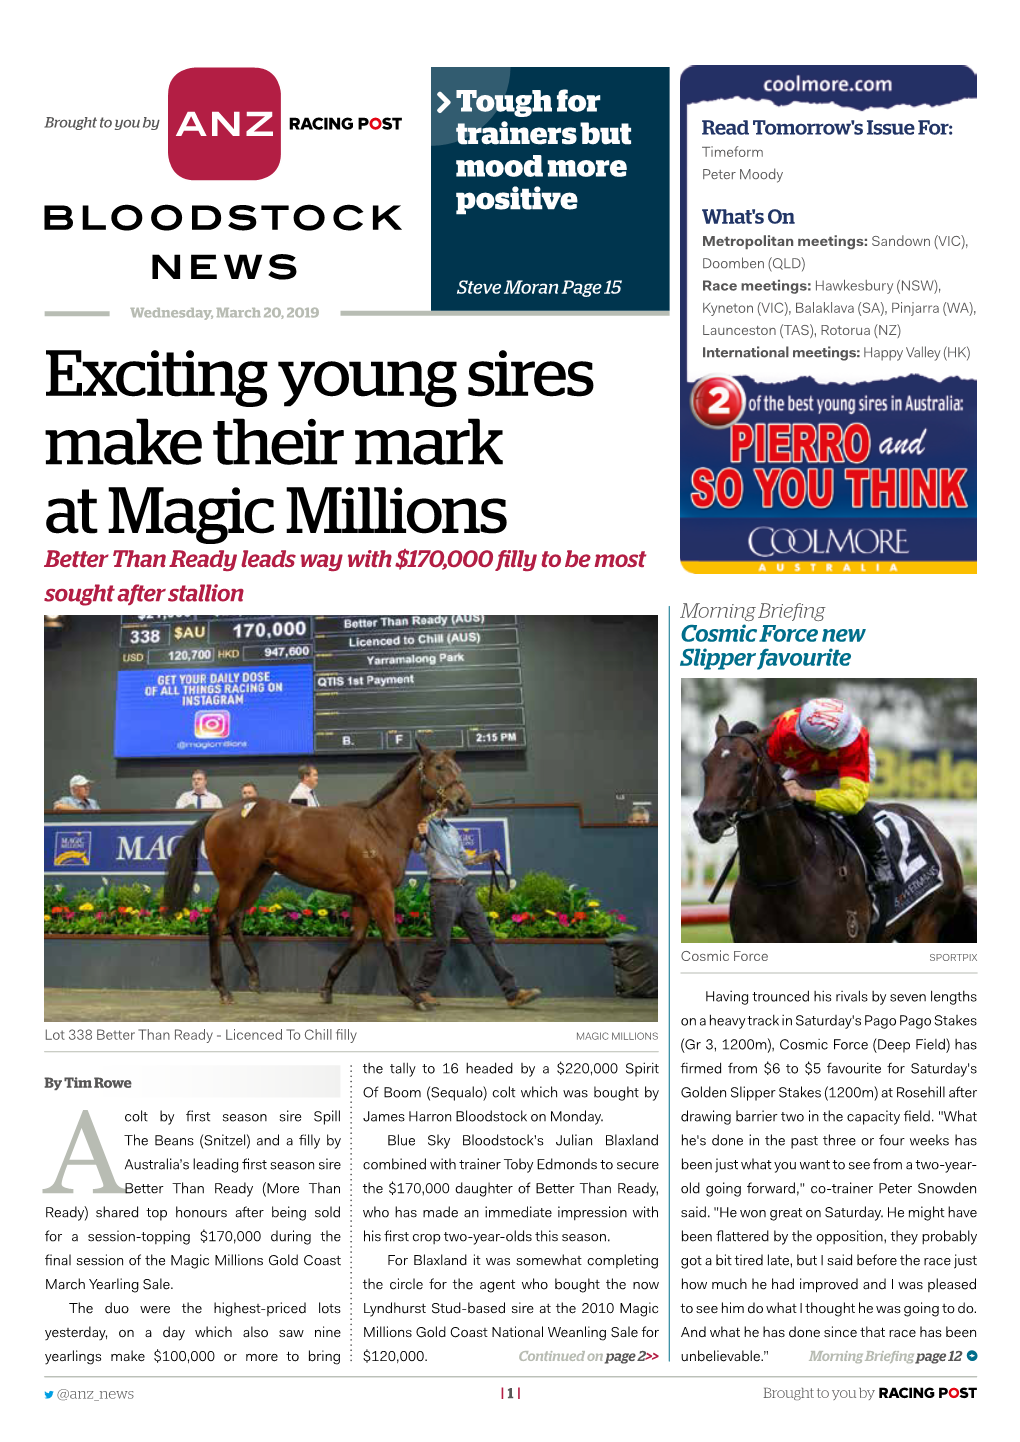 Exciting Young Sires Make Their Mark at Magic Millions | 2 | Wednesday, March 20, 2019